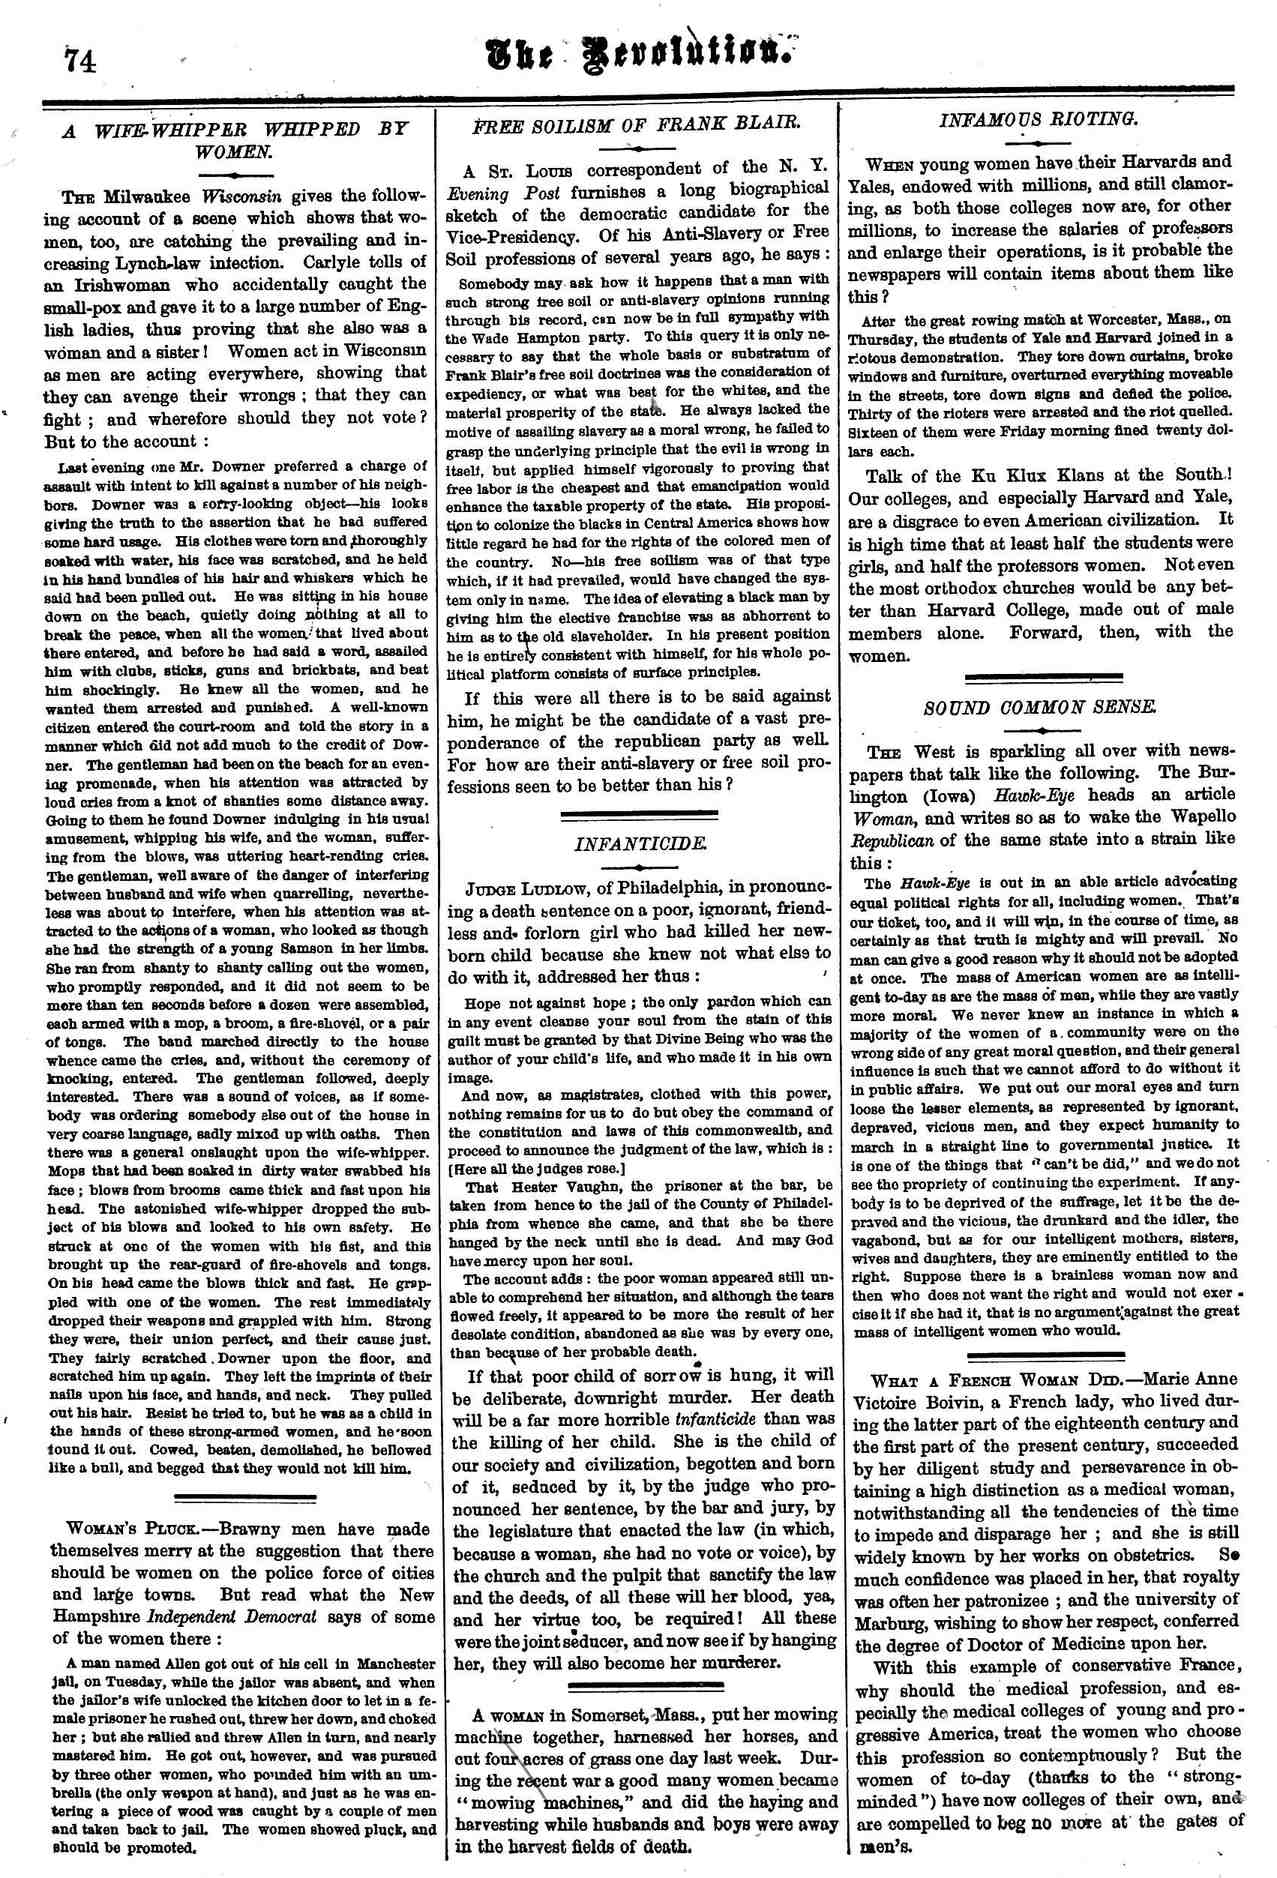 The-Revolution-Susan-B.-Anthony's-Suffrage-Women's-Rights-Newspaper-August-6,-1868